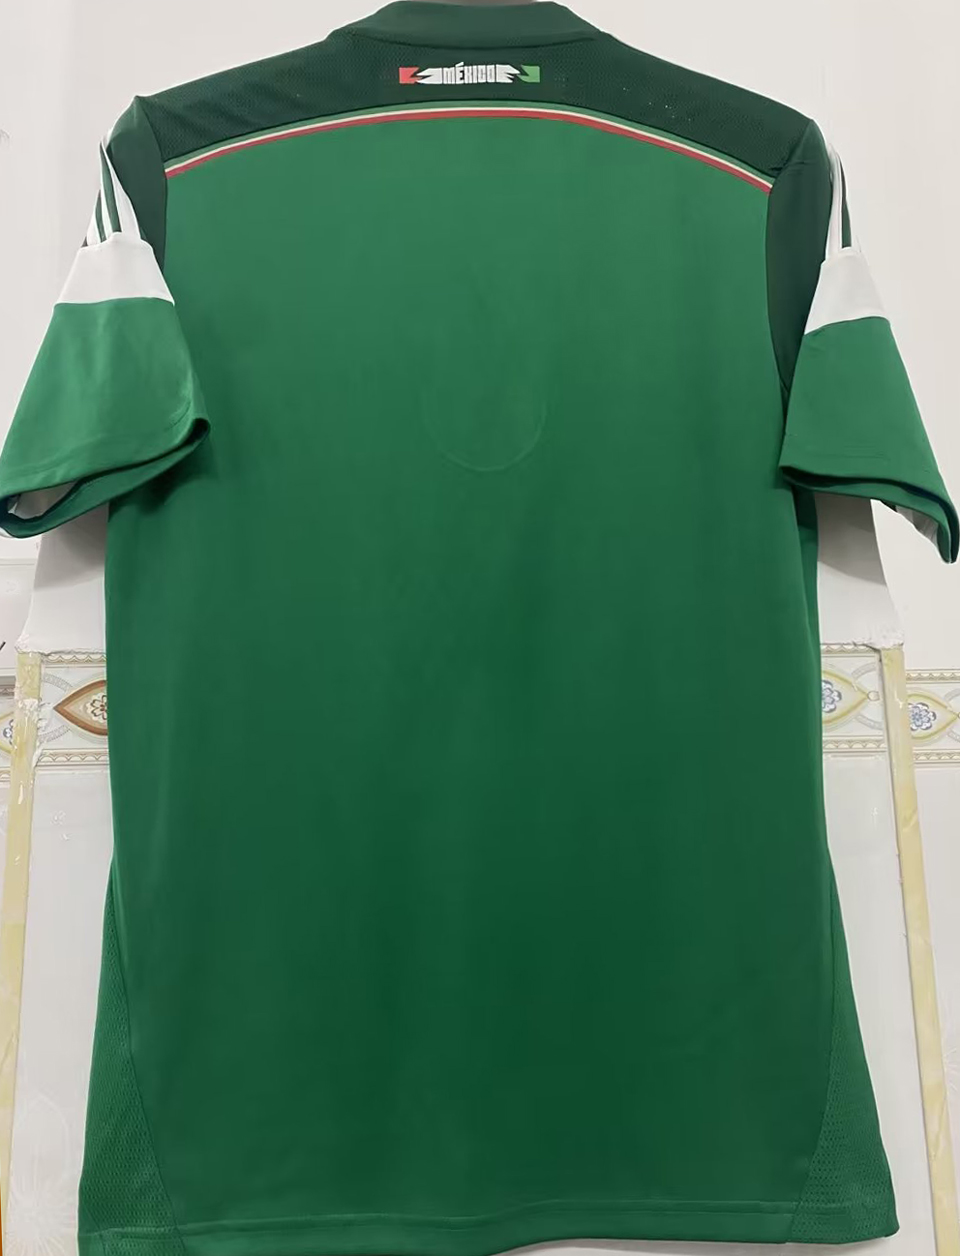 mexico green jersey 2014